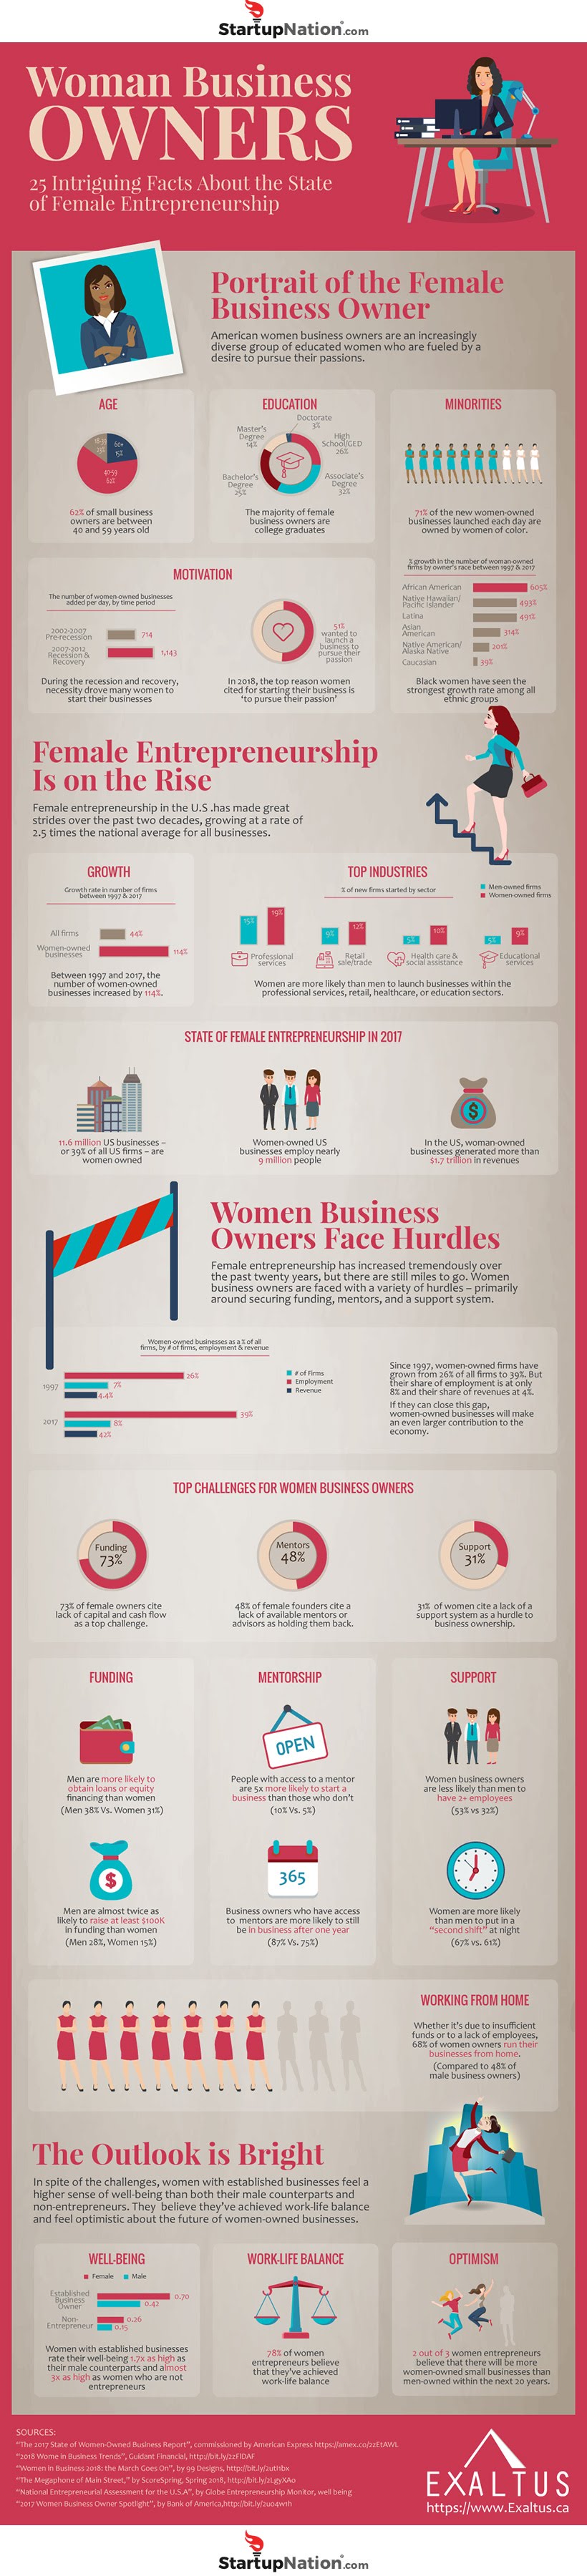 Women Business Owners